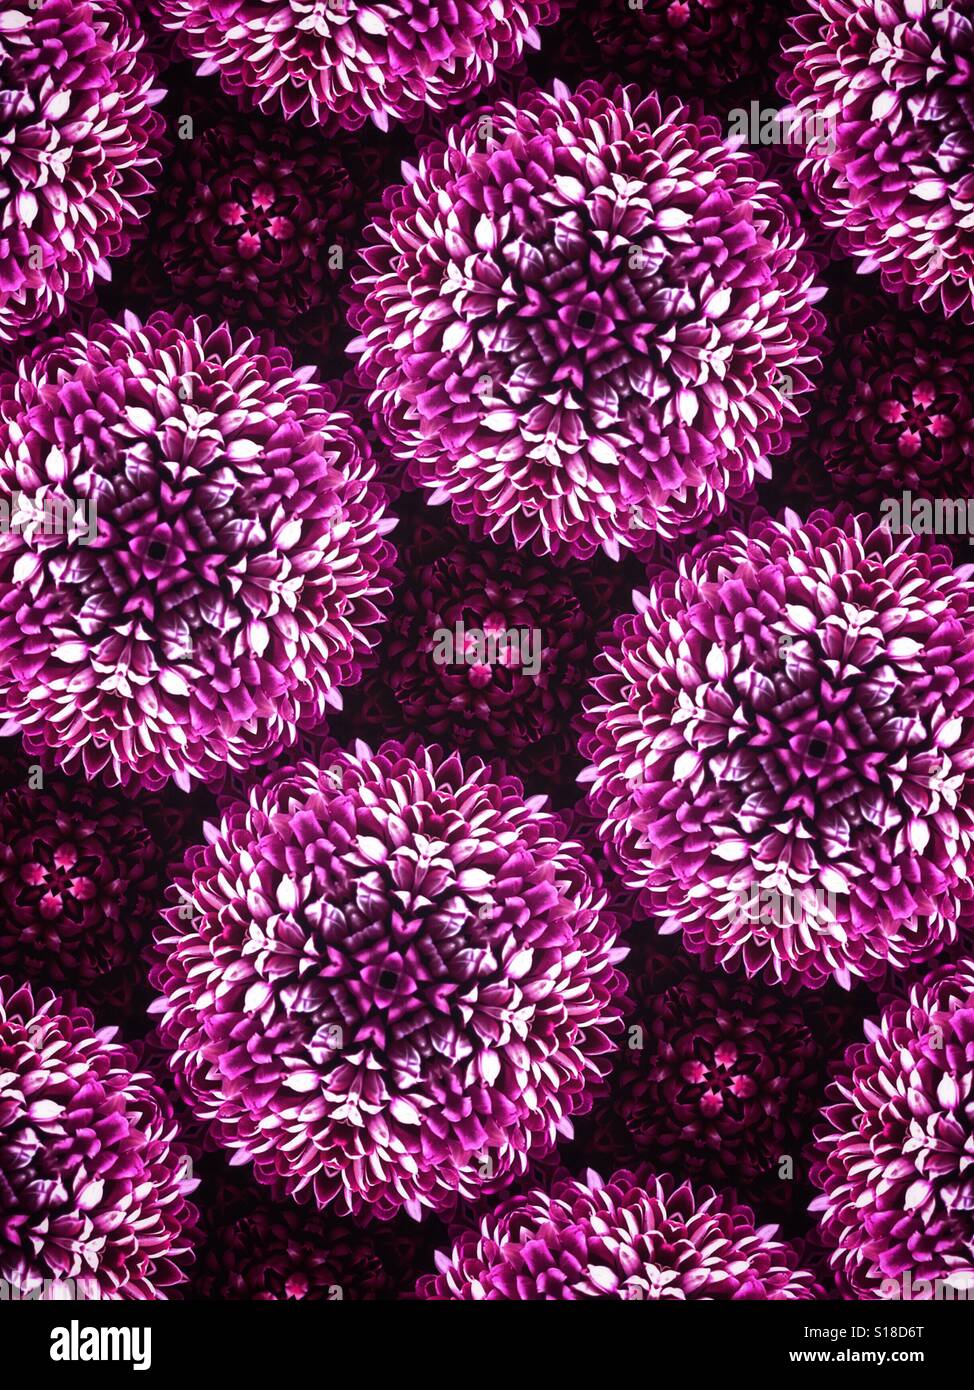 A beautiful abstract pattern image showing Gus his violet colored flowers Stock Photo